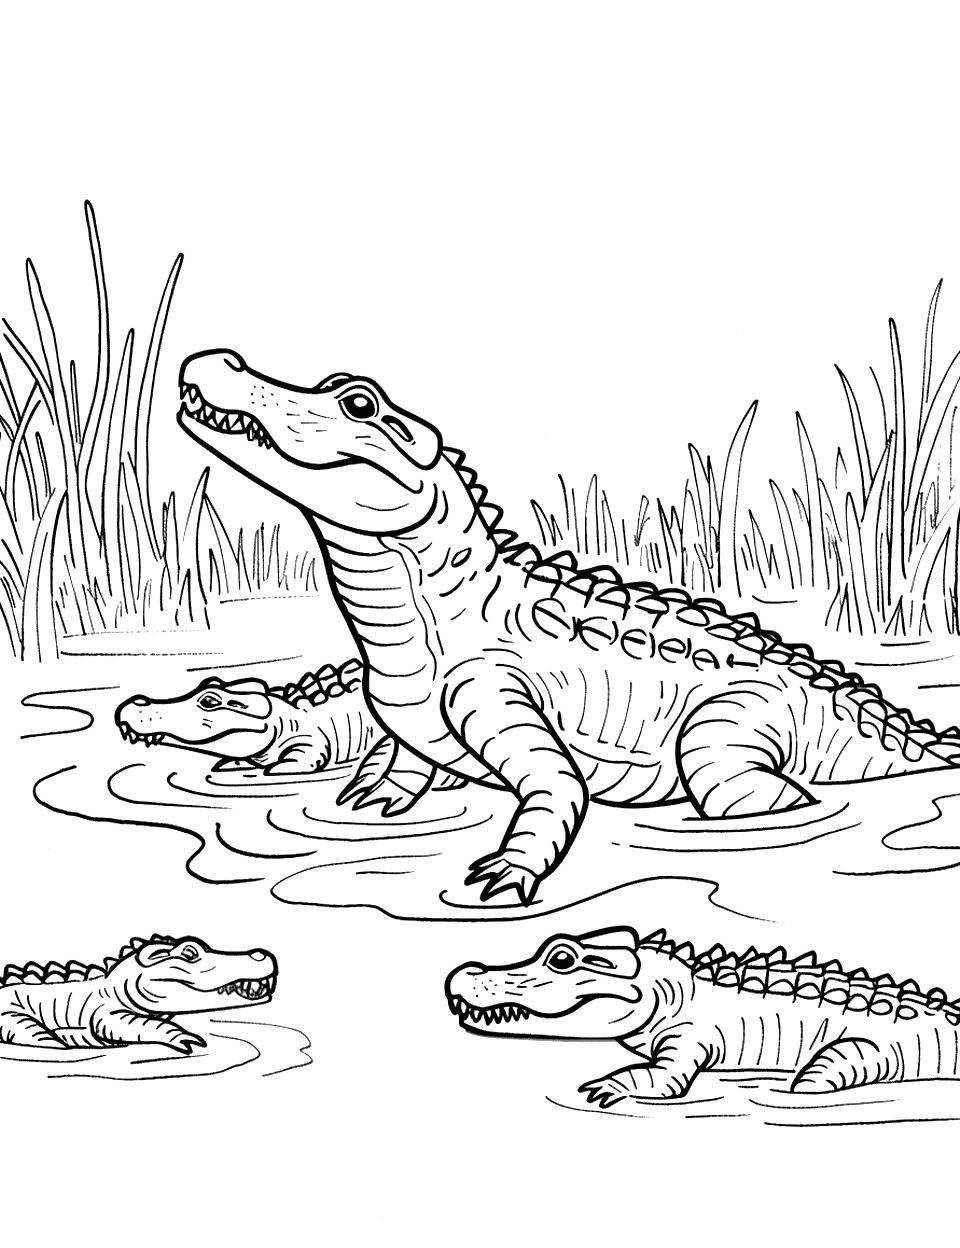 Crocodile Family Day Coloring Page - A group of baby crocodiles following their mother through marshy waters.